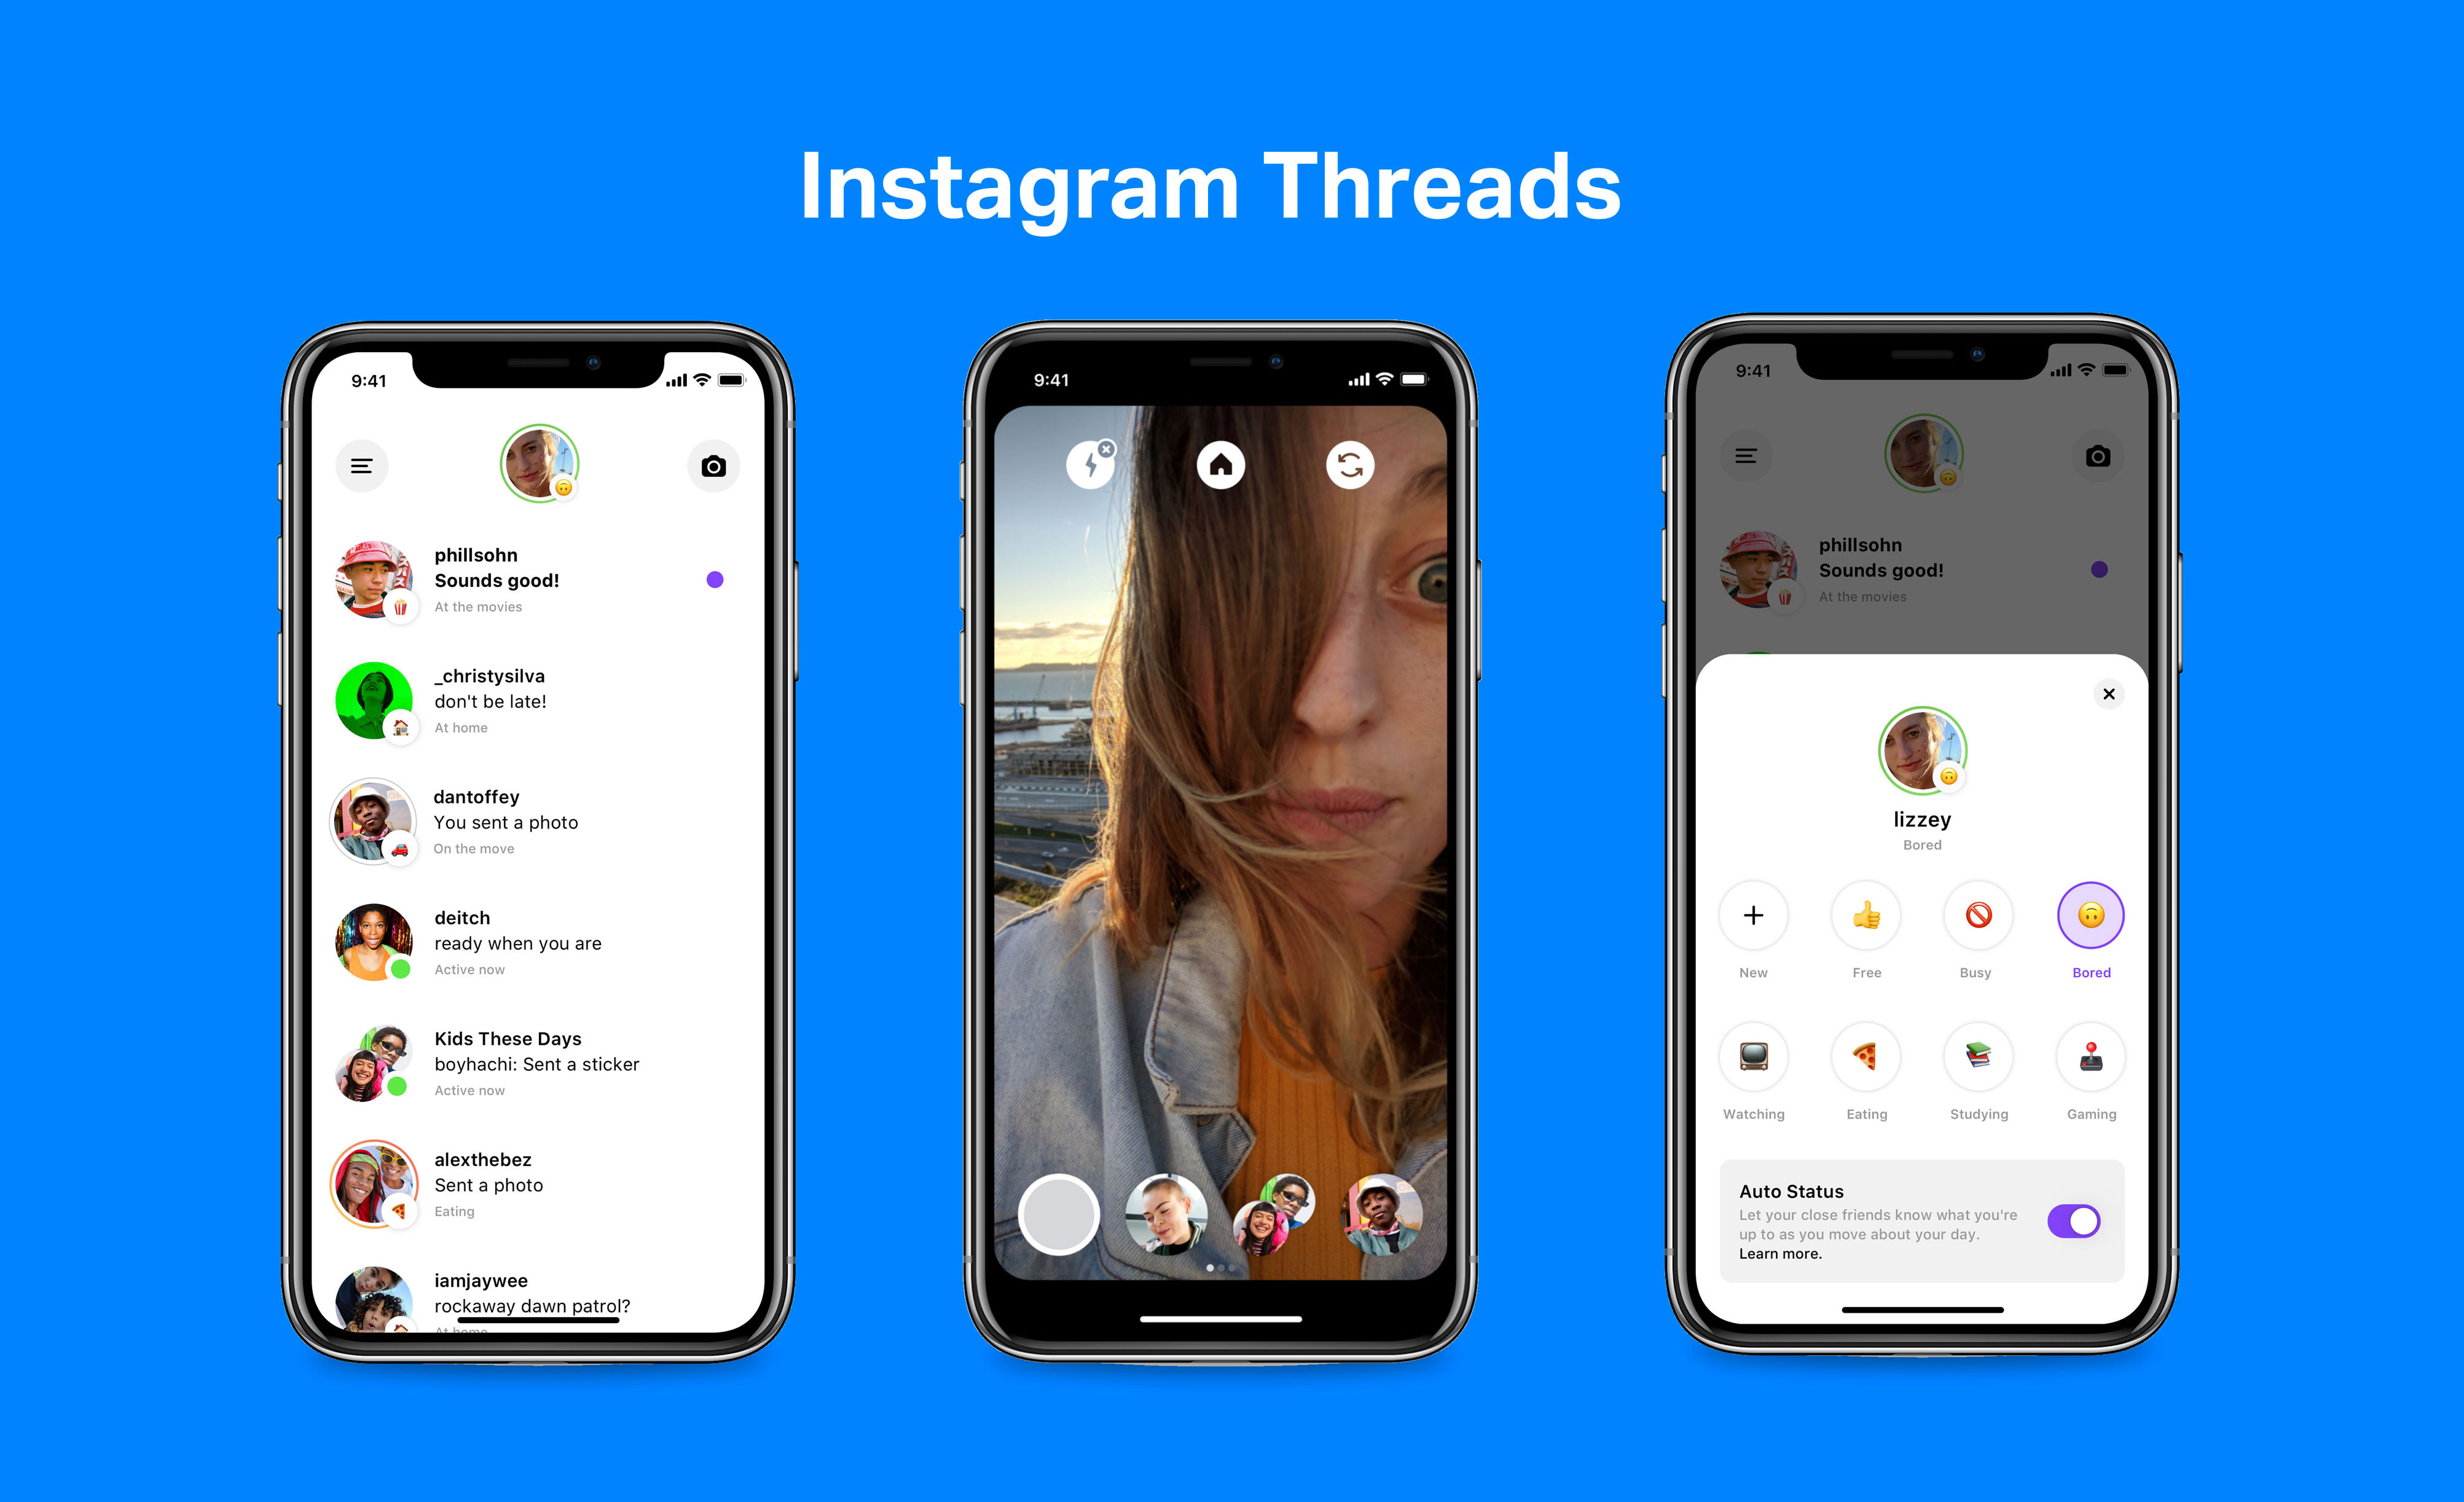 Learn How to Use the App - Threads from Instagram